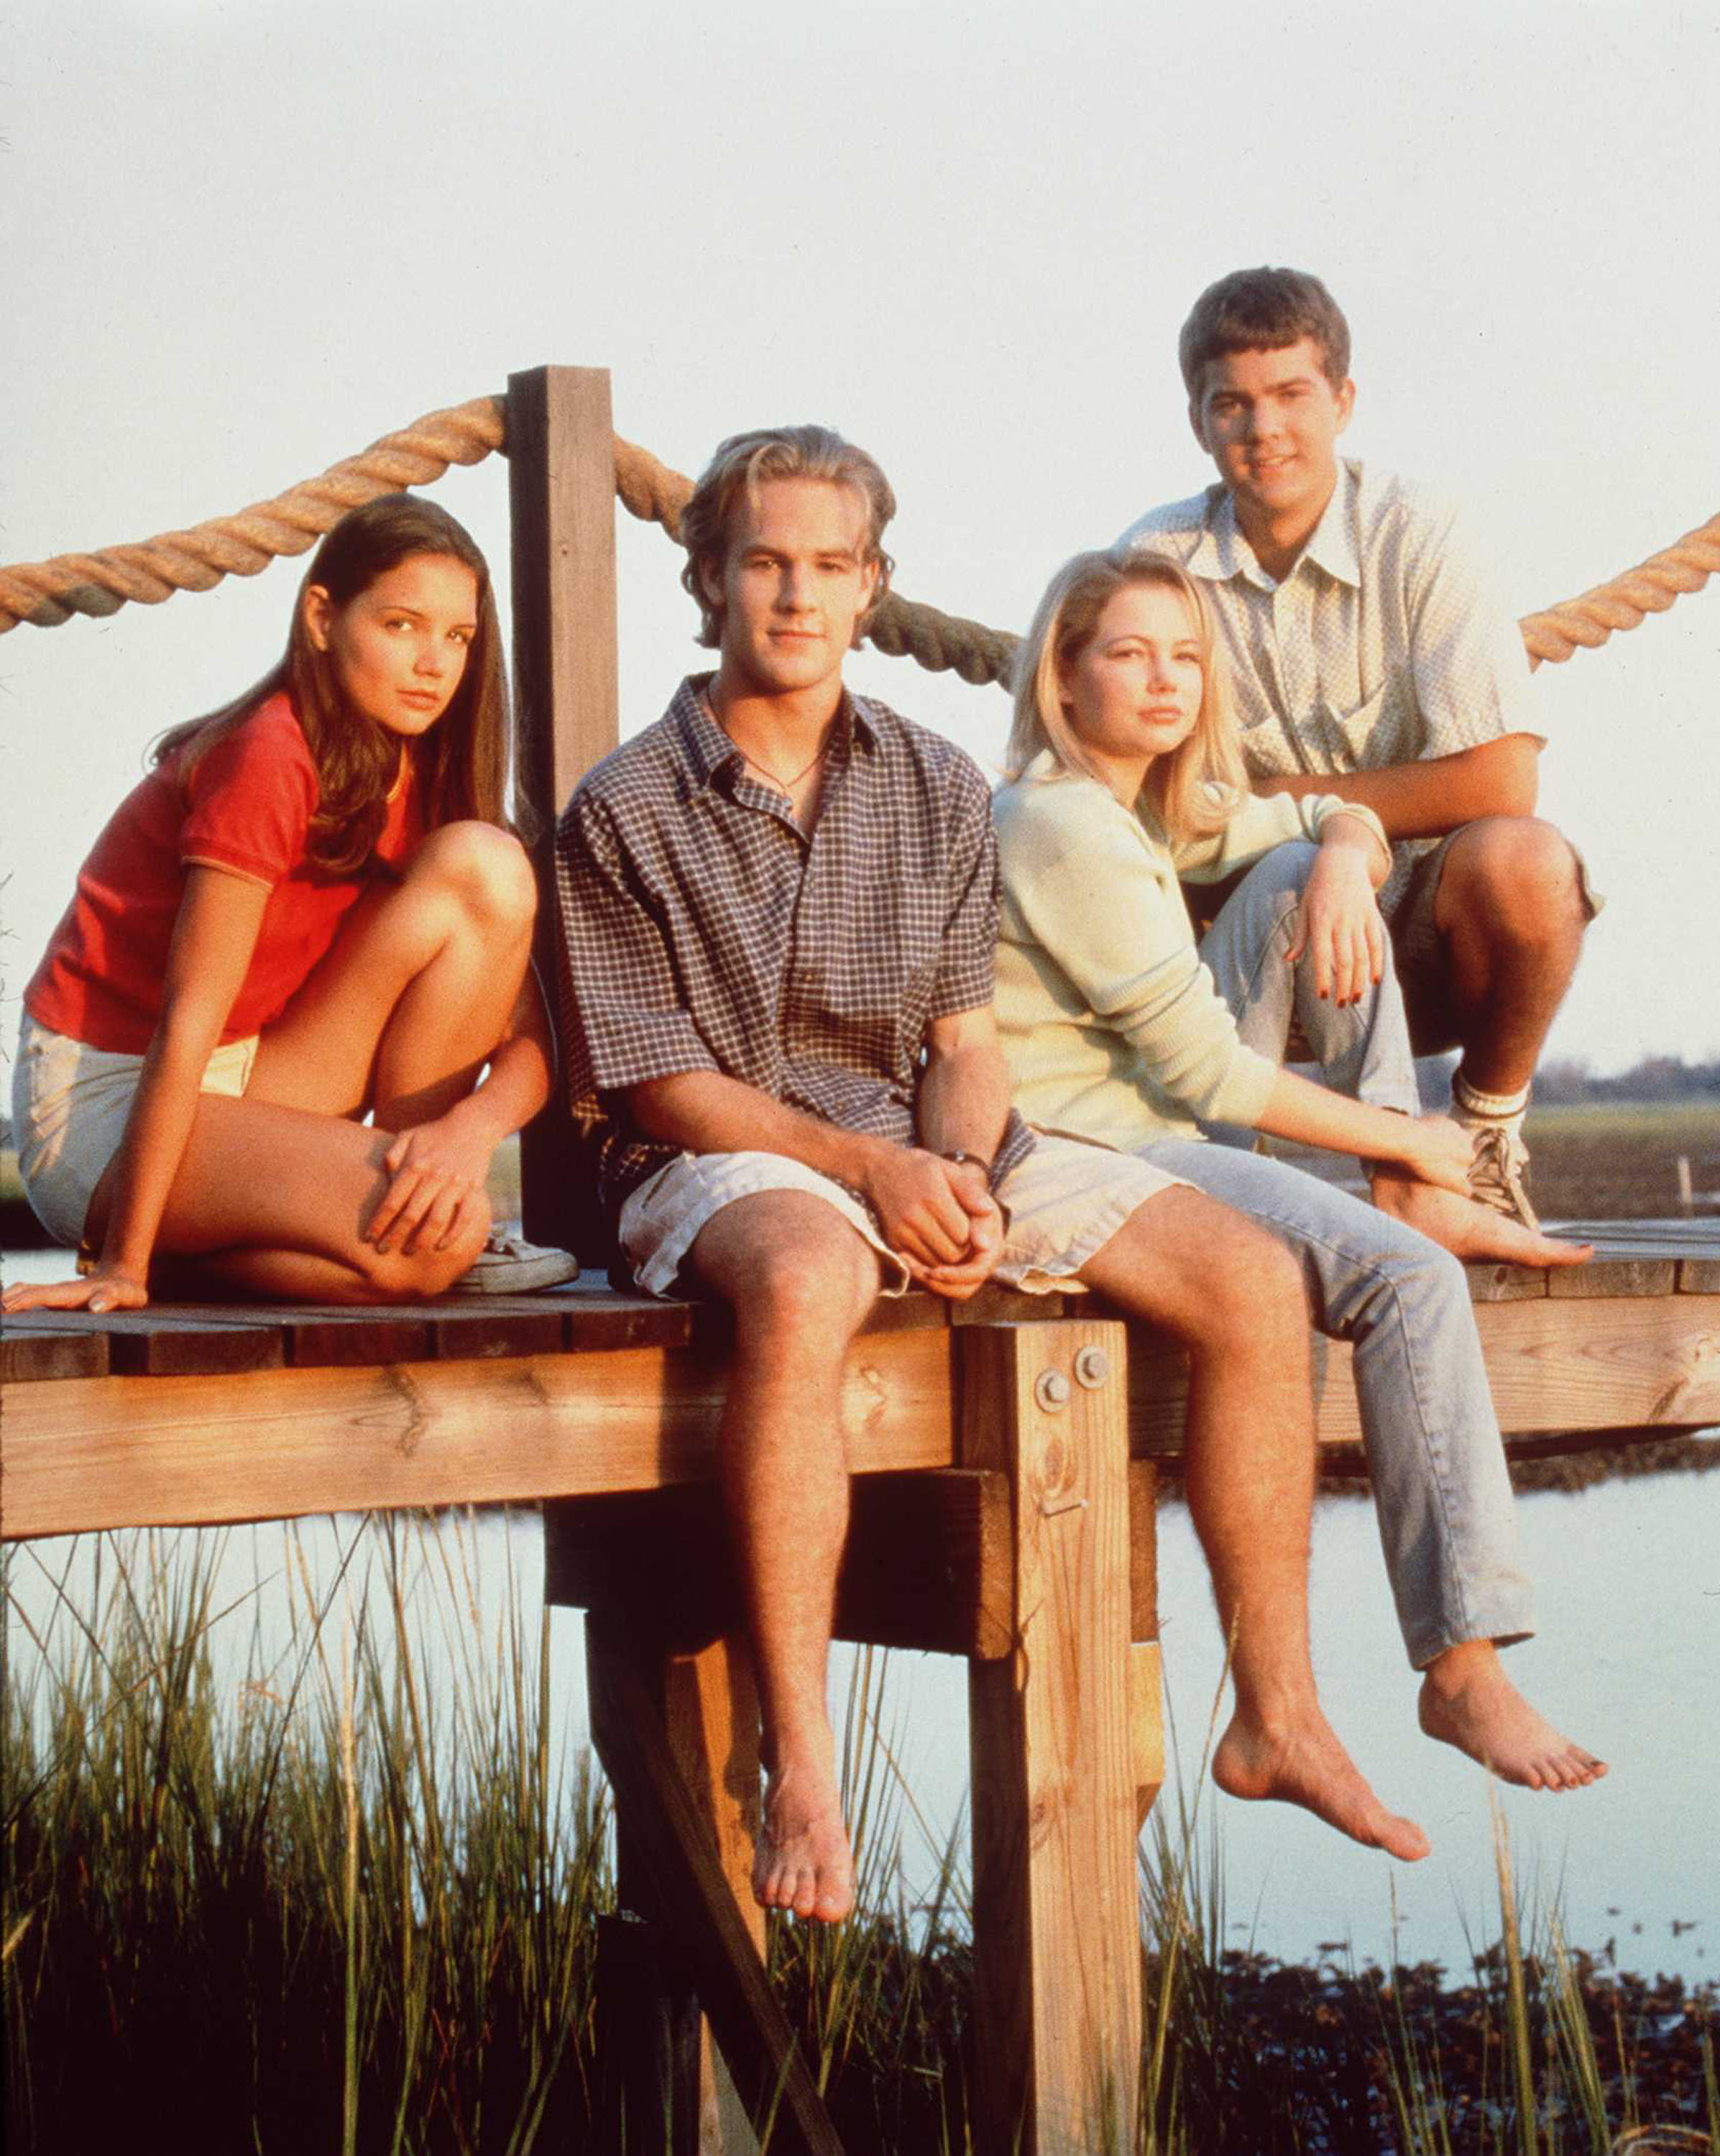 The cast of "Dawson's Creek" poses for a photo on December 31, 1997: Katie Holmes, James Van Der Beek, Michelle Williams, and Joshua Jackson | Source: Getty Images